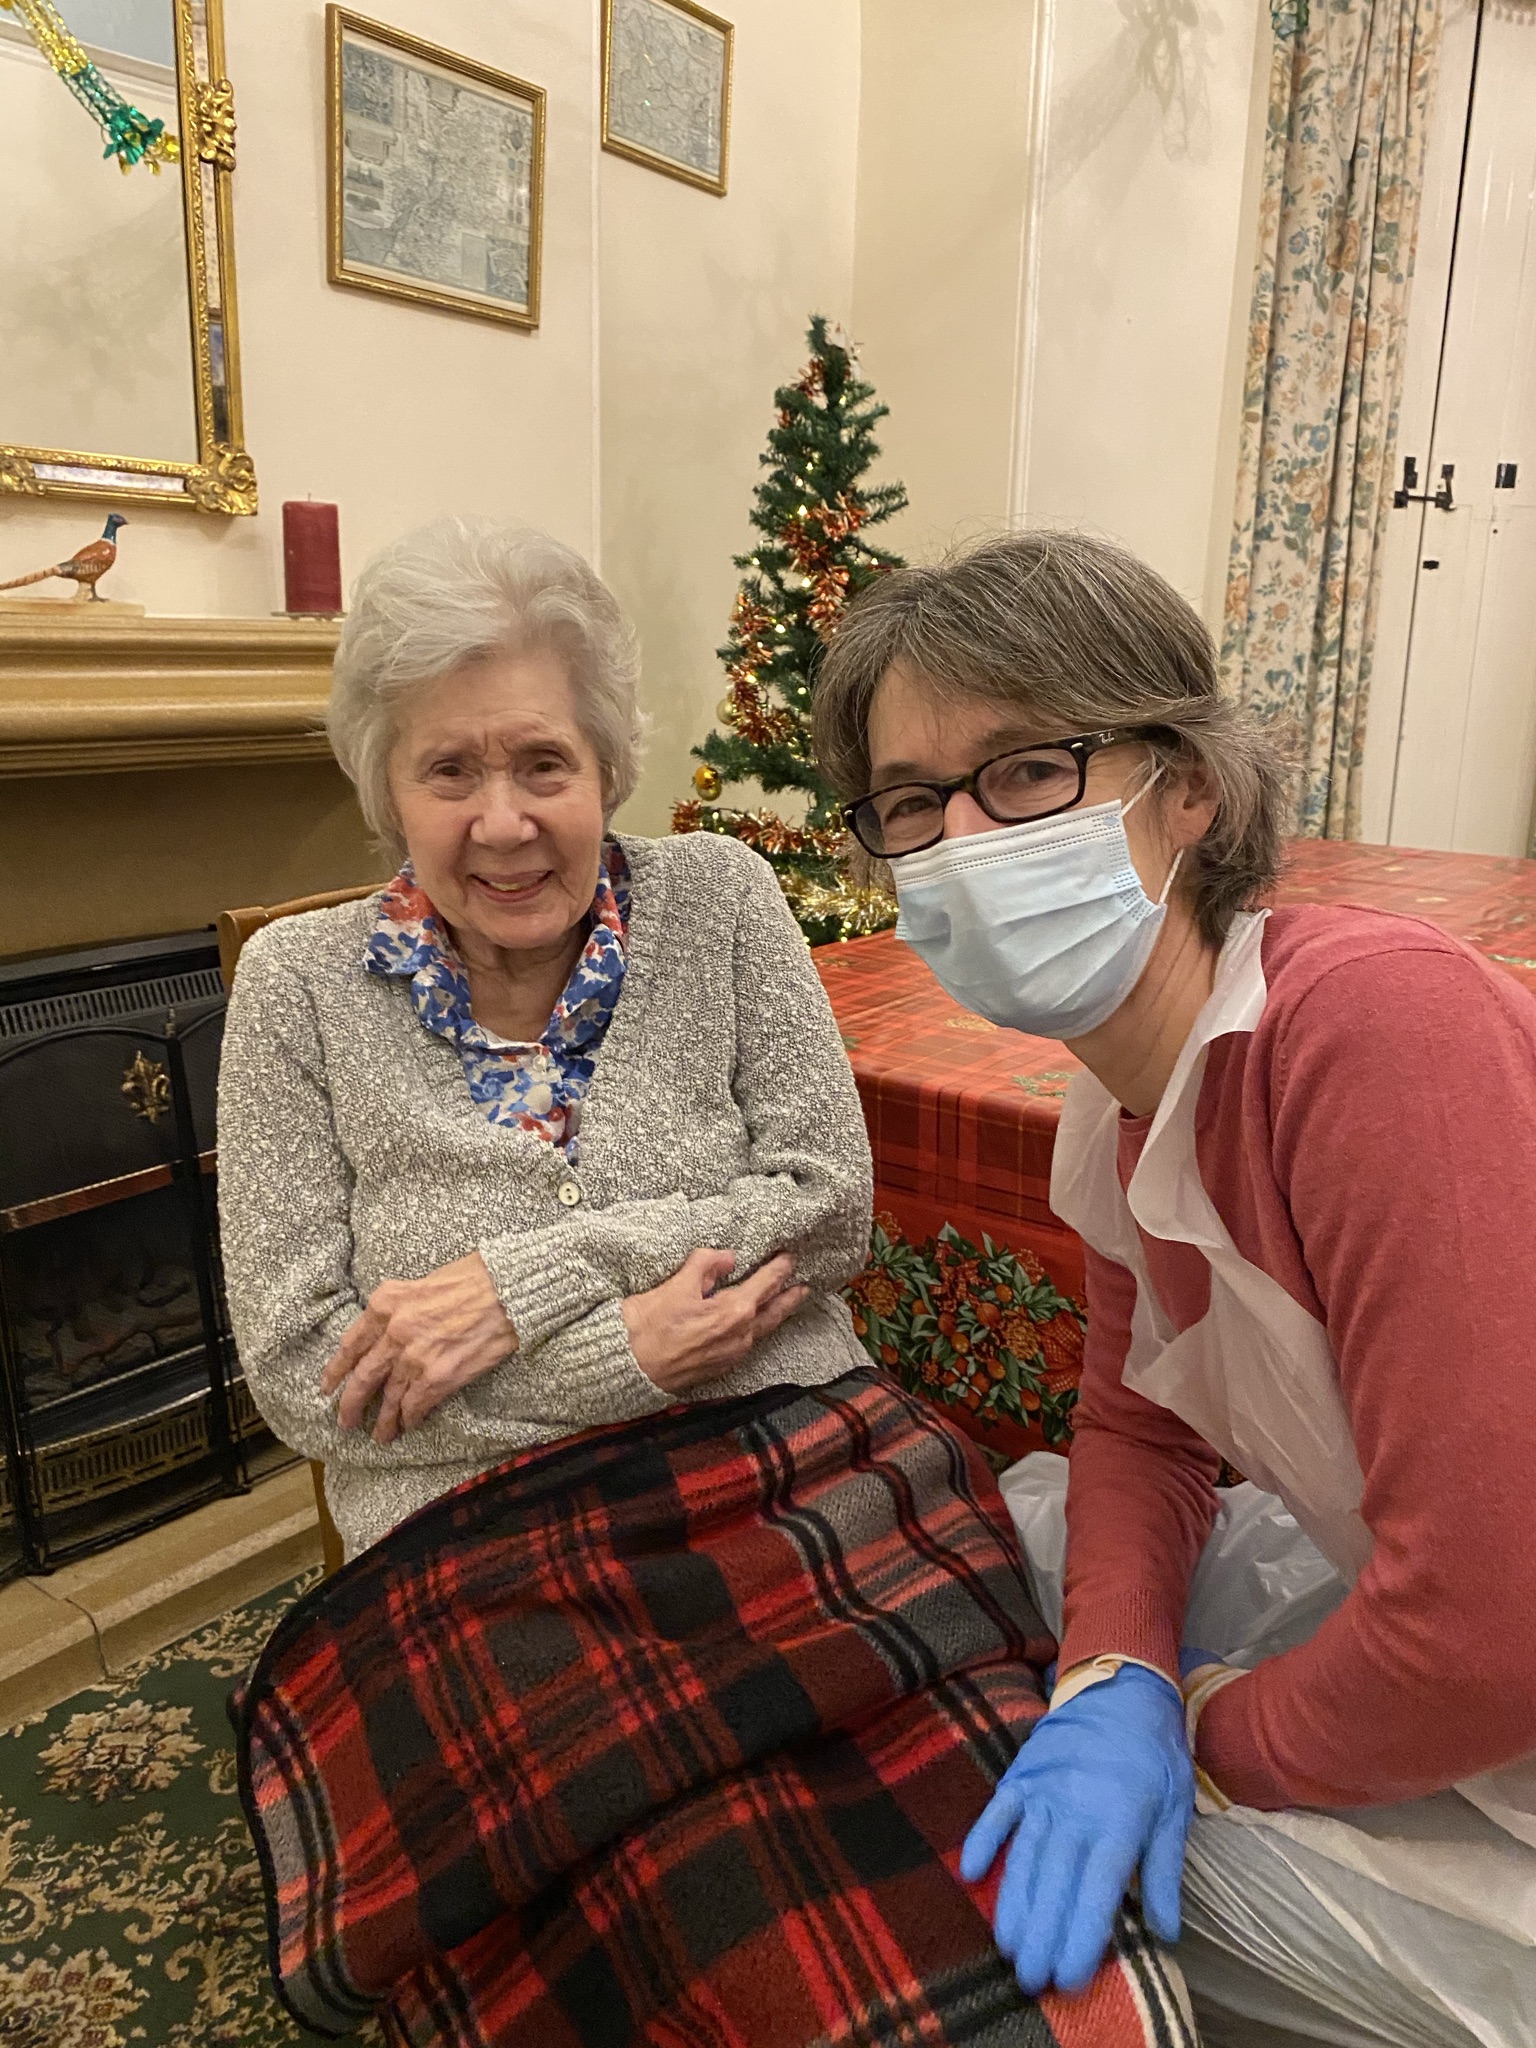 A Mother-Daughter Visit Following an LFD COVID-19 Test - 17.12.20